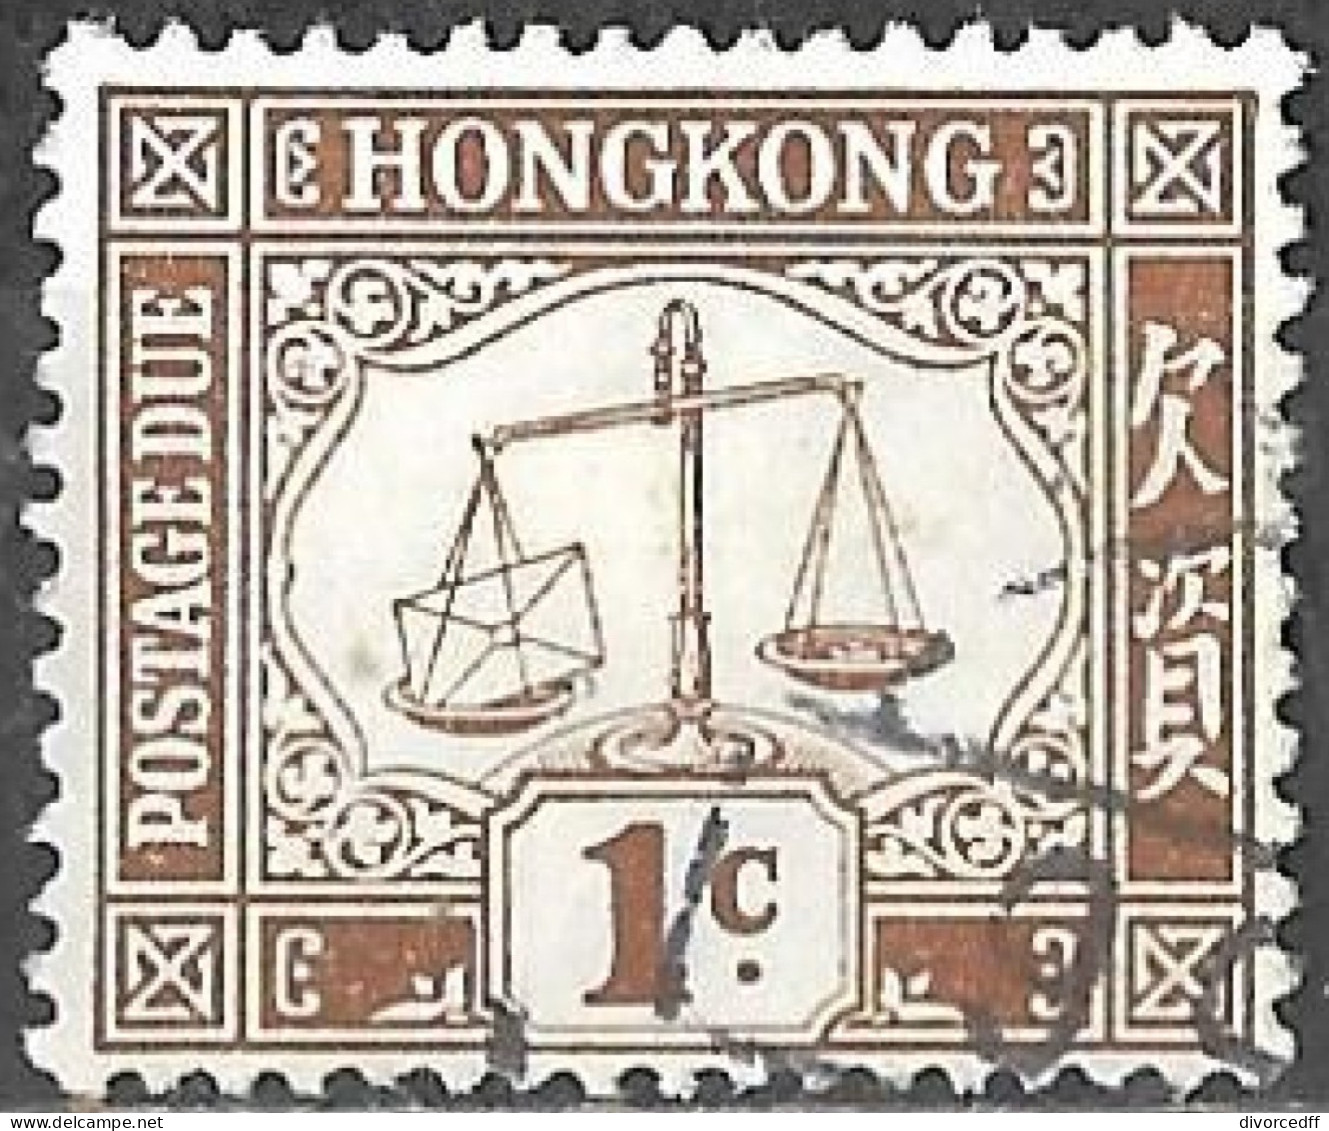 Hong Kong Used Postage Due Stamp Scales Showing Letter Overweight 1 Cent [WLT283] - Impuestos